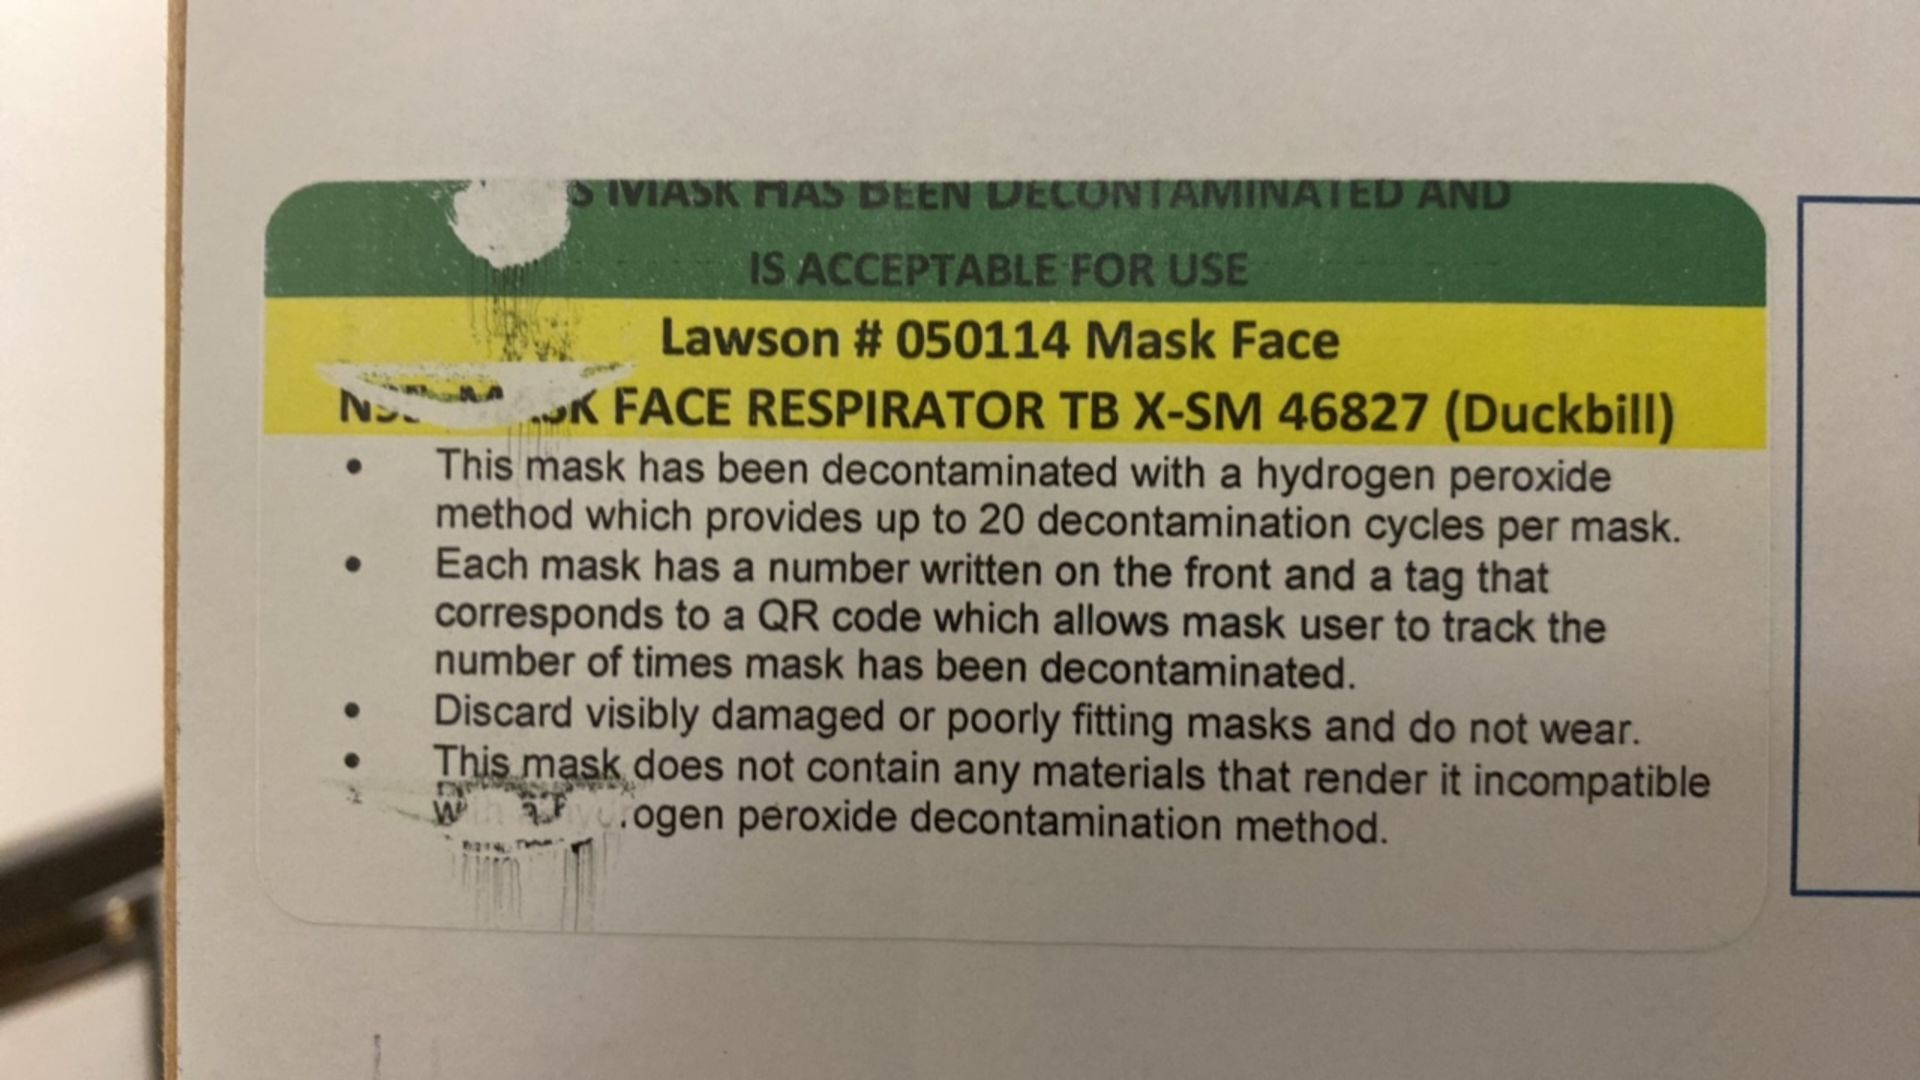 LAWSON DUCKBILL REPROCESSED N95 MASKS QTY:2 CASES/ 20 X 20 BAGS - Image 2 of 3